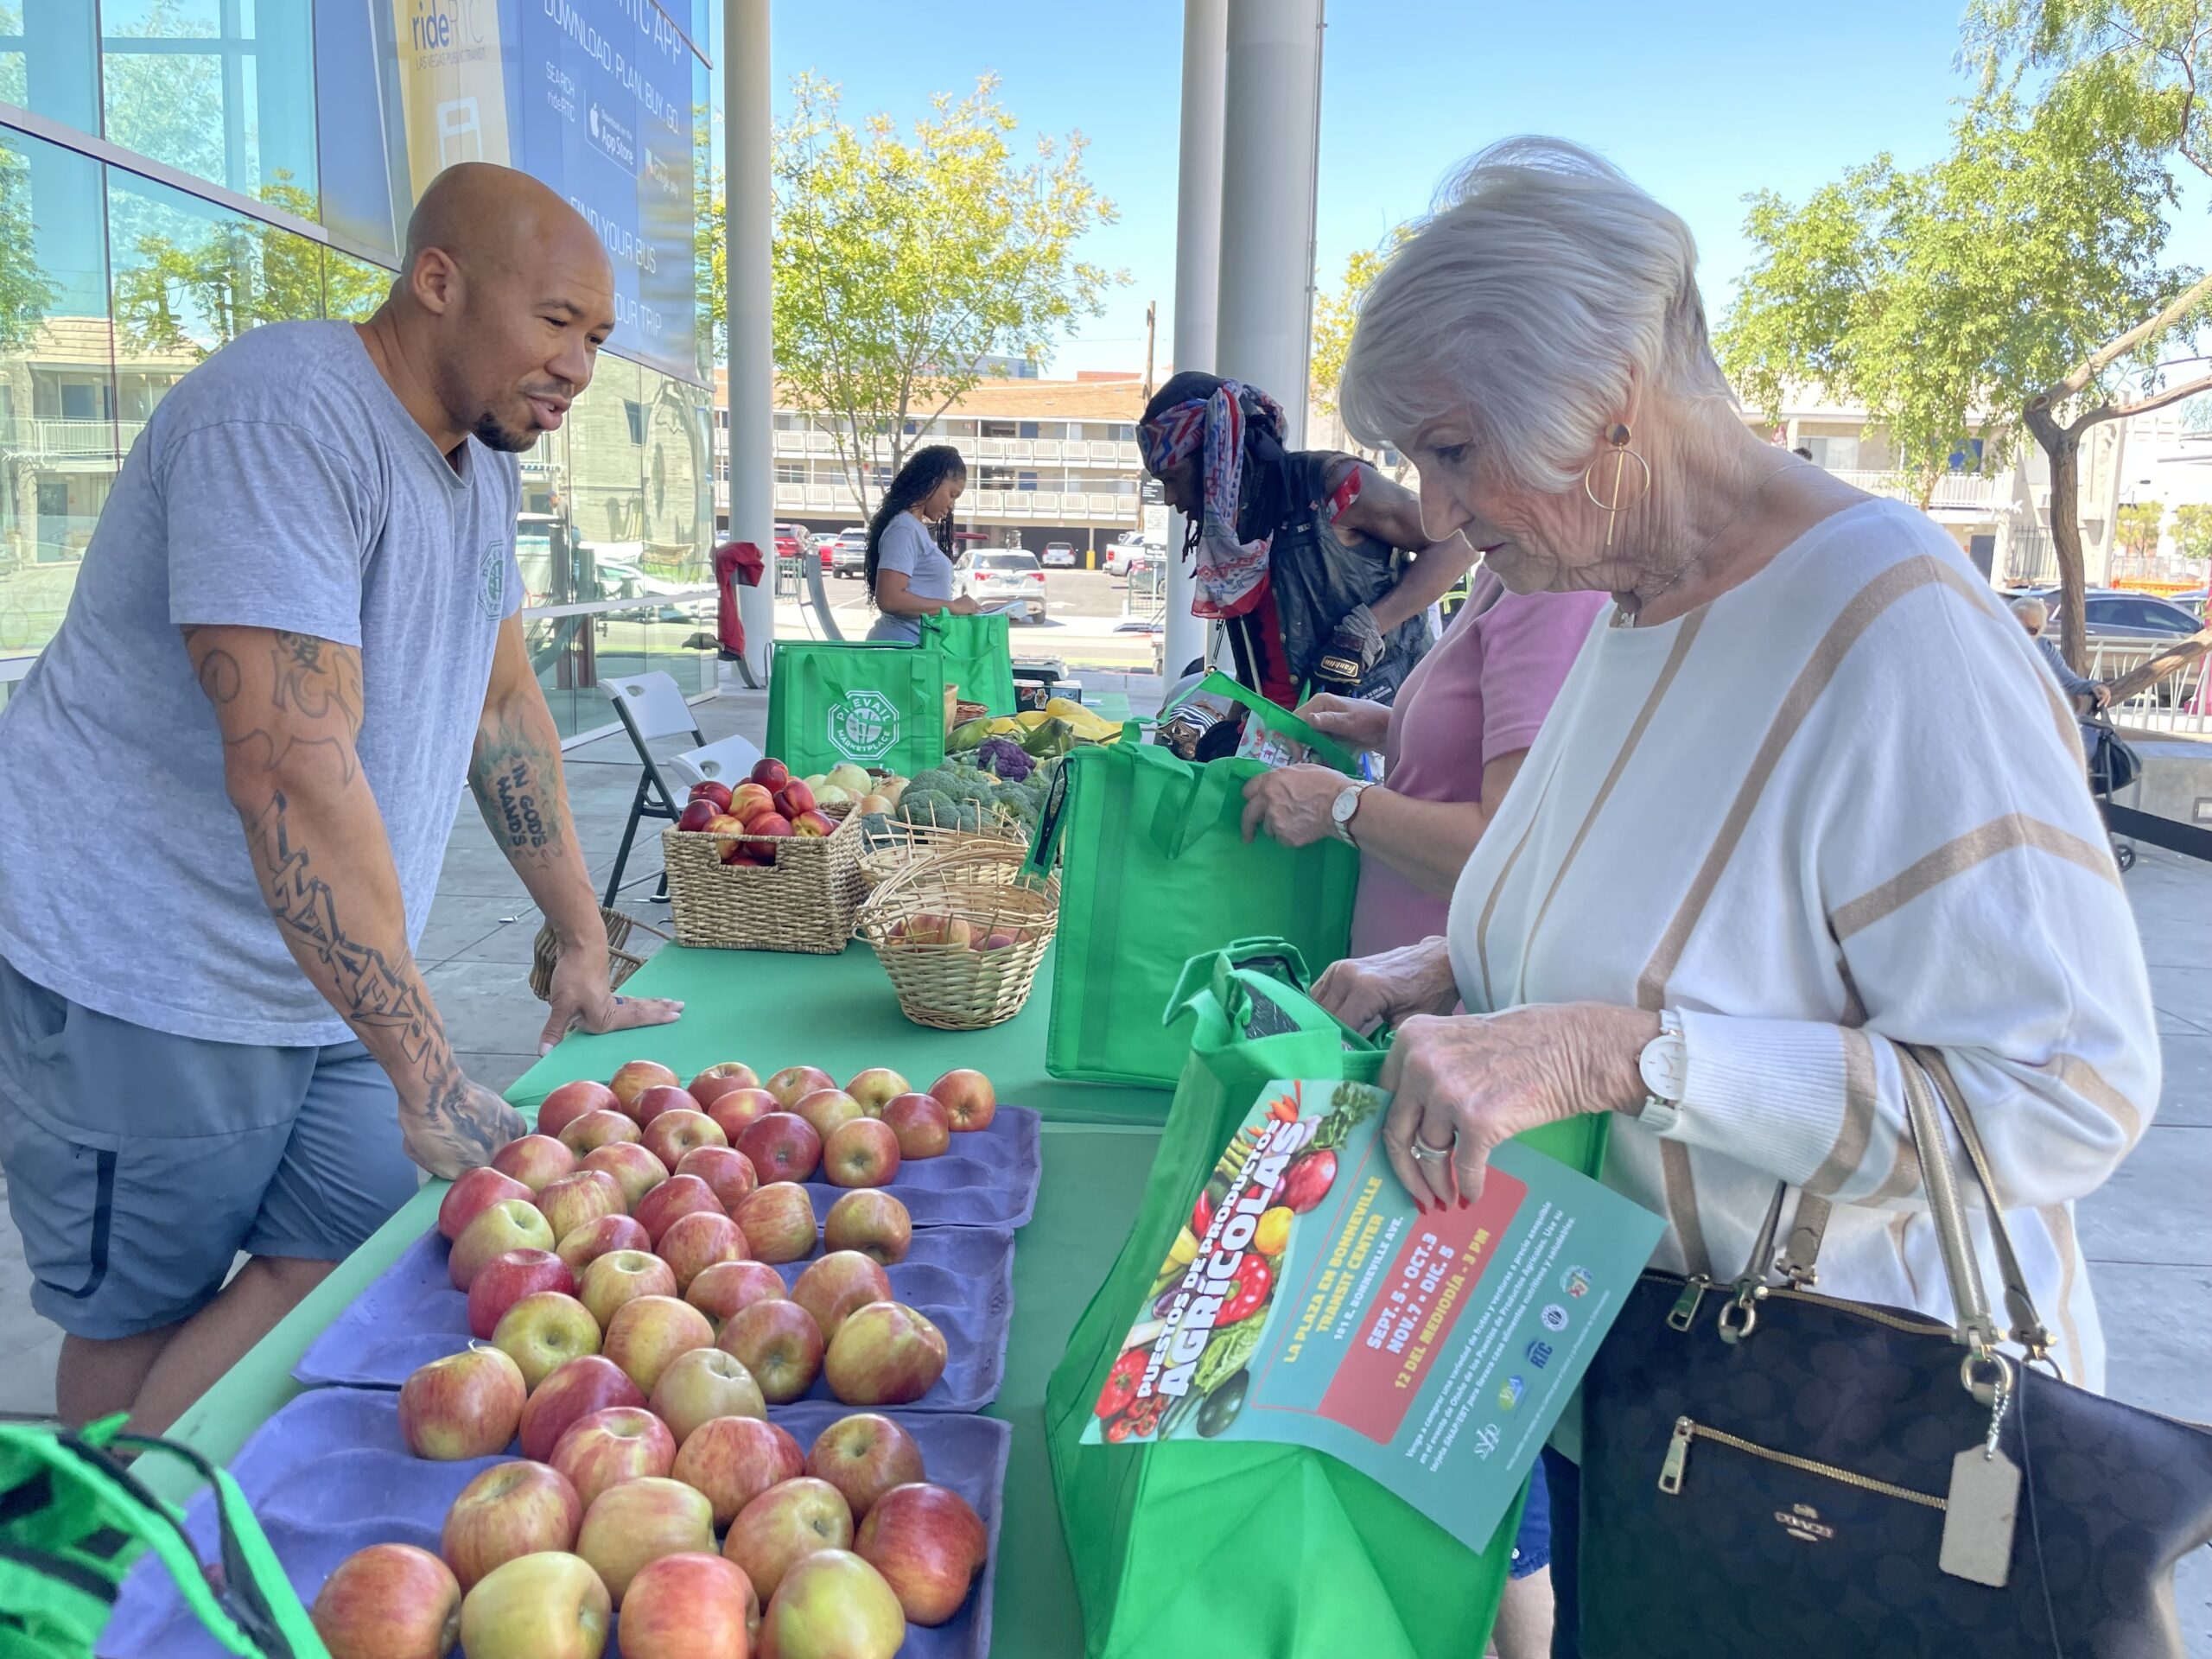 older woman shopping for apples at an outdoor market